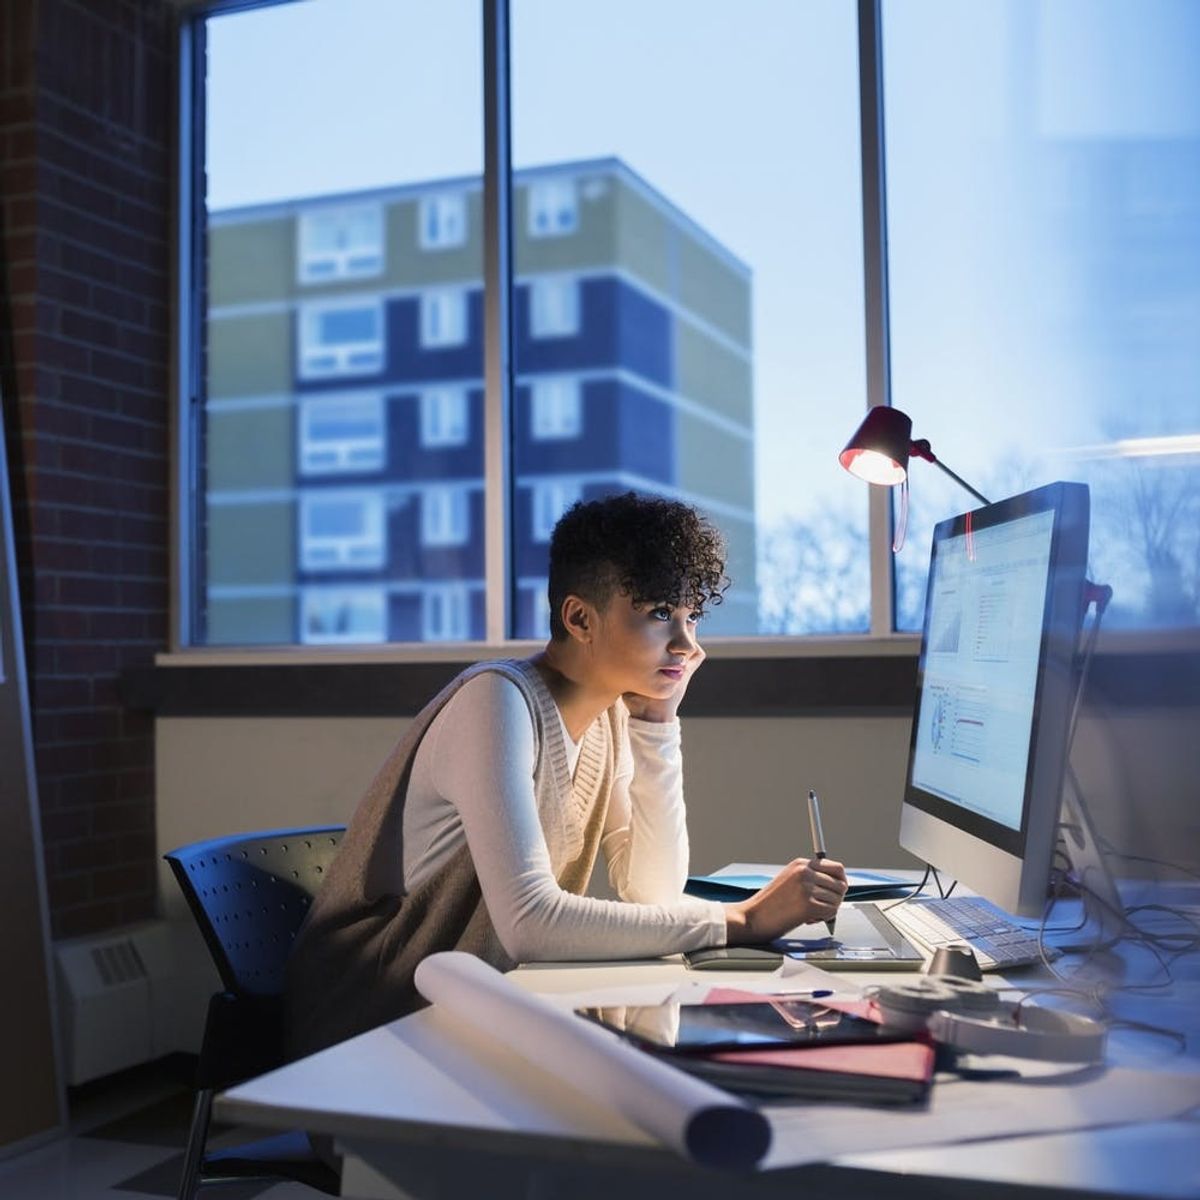 5 Recognizable Signs You’re a Workaholic